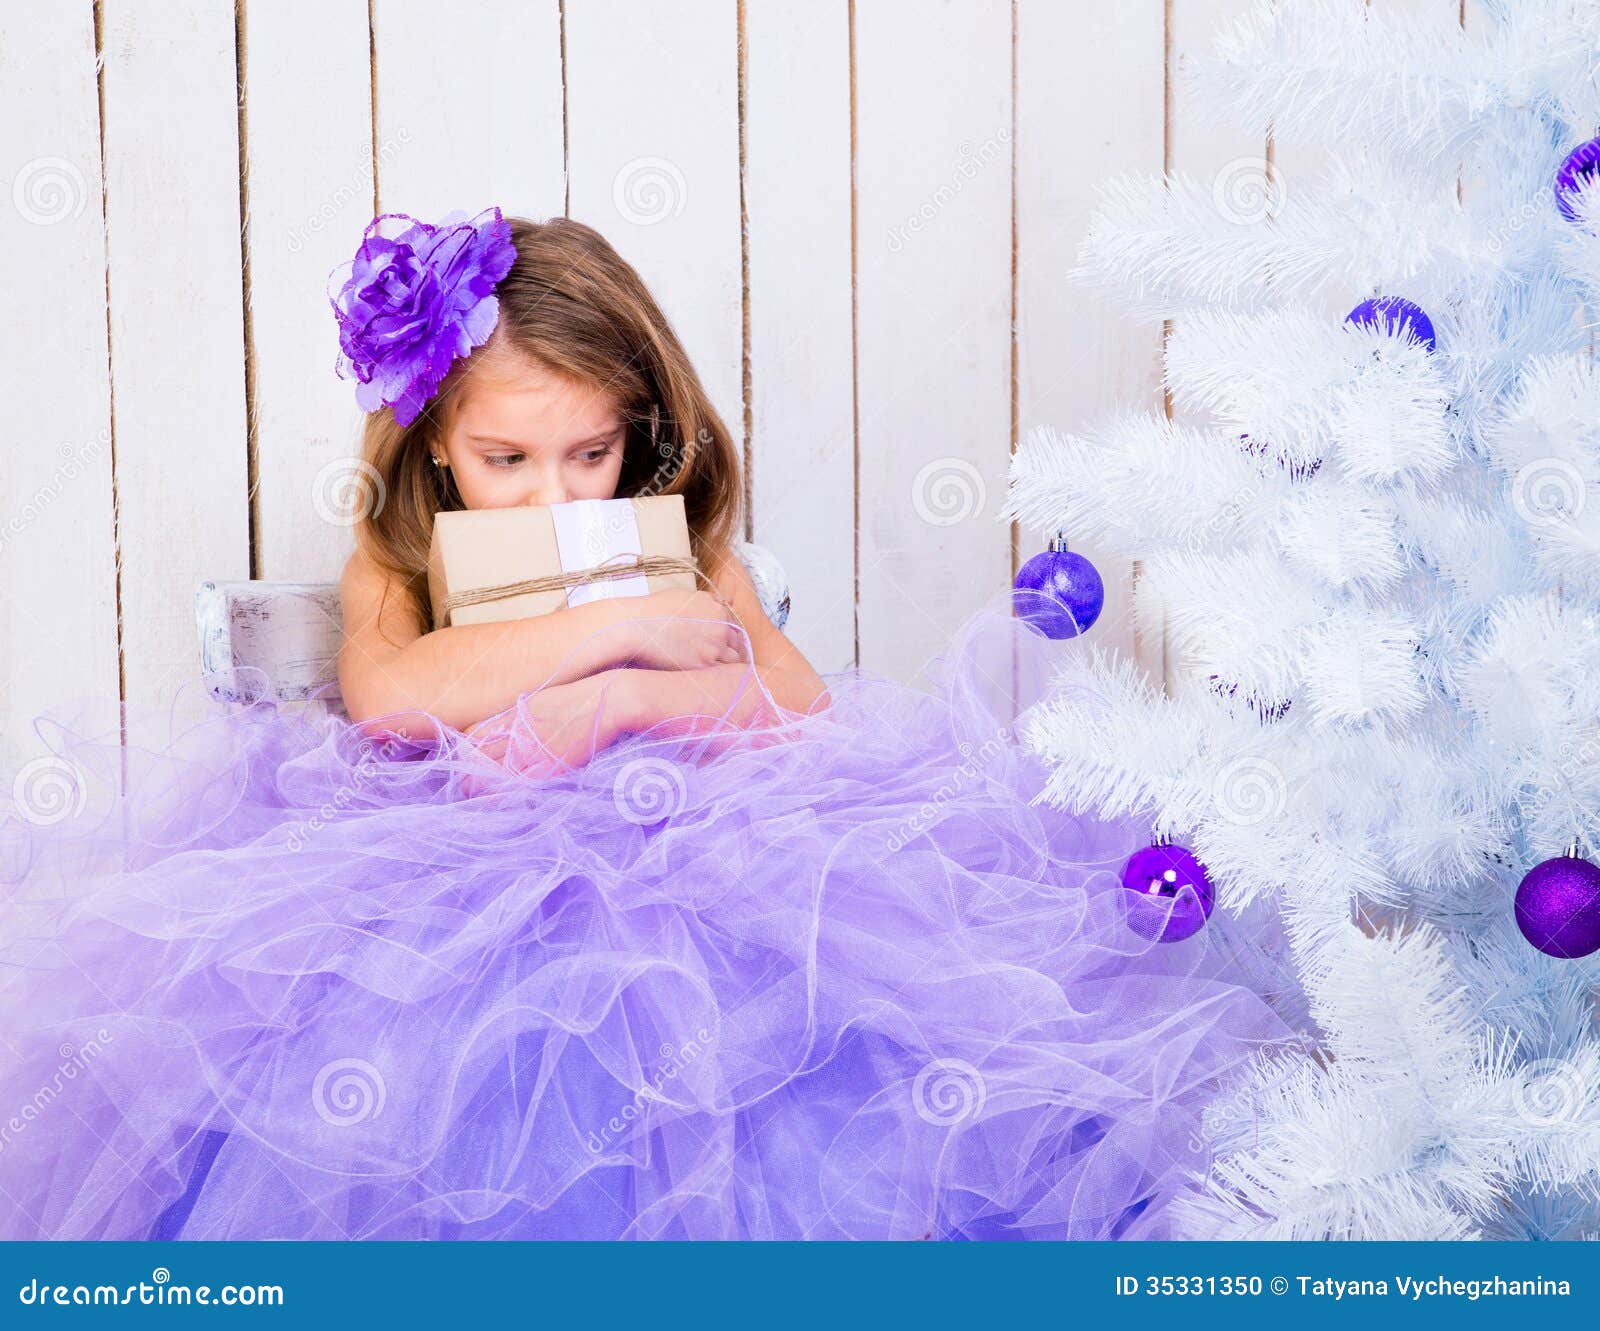 Sad Little Girl With A Gift Stock Photo - Image: 35331350